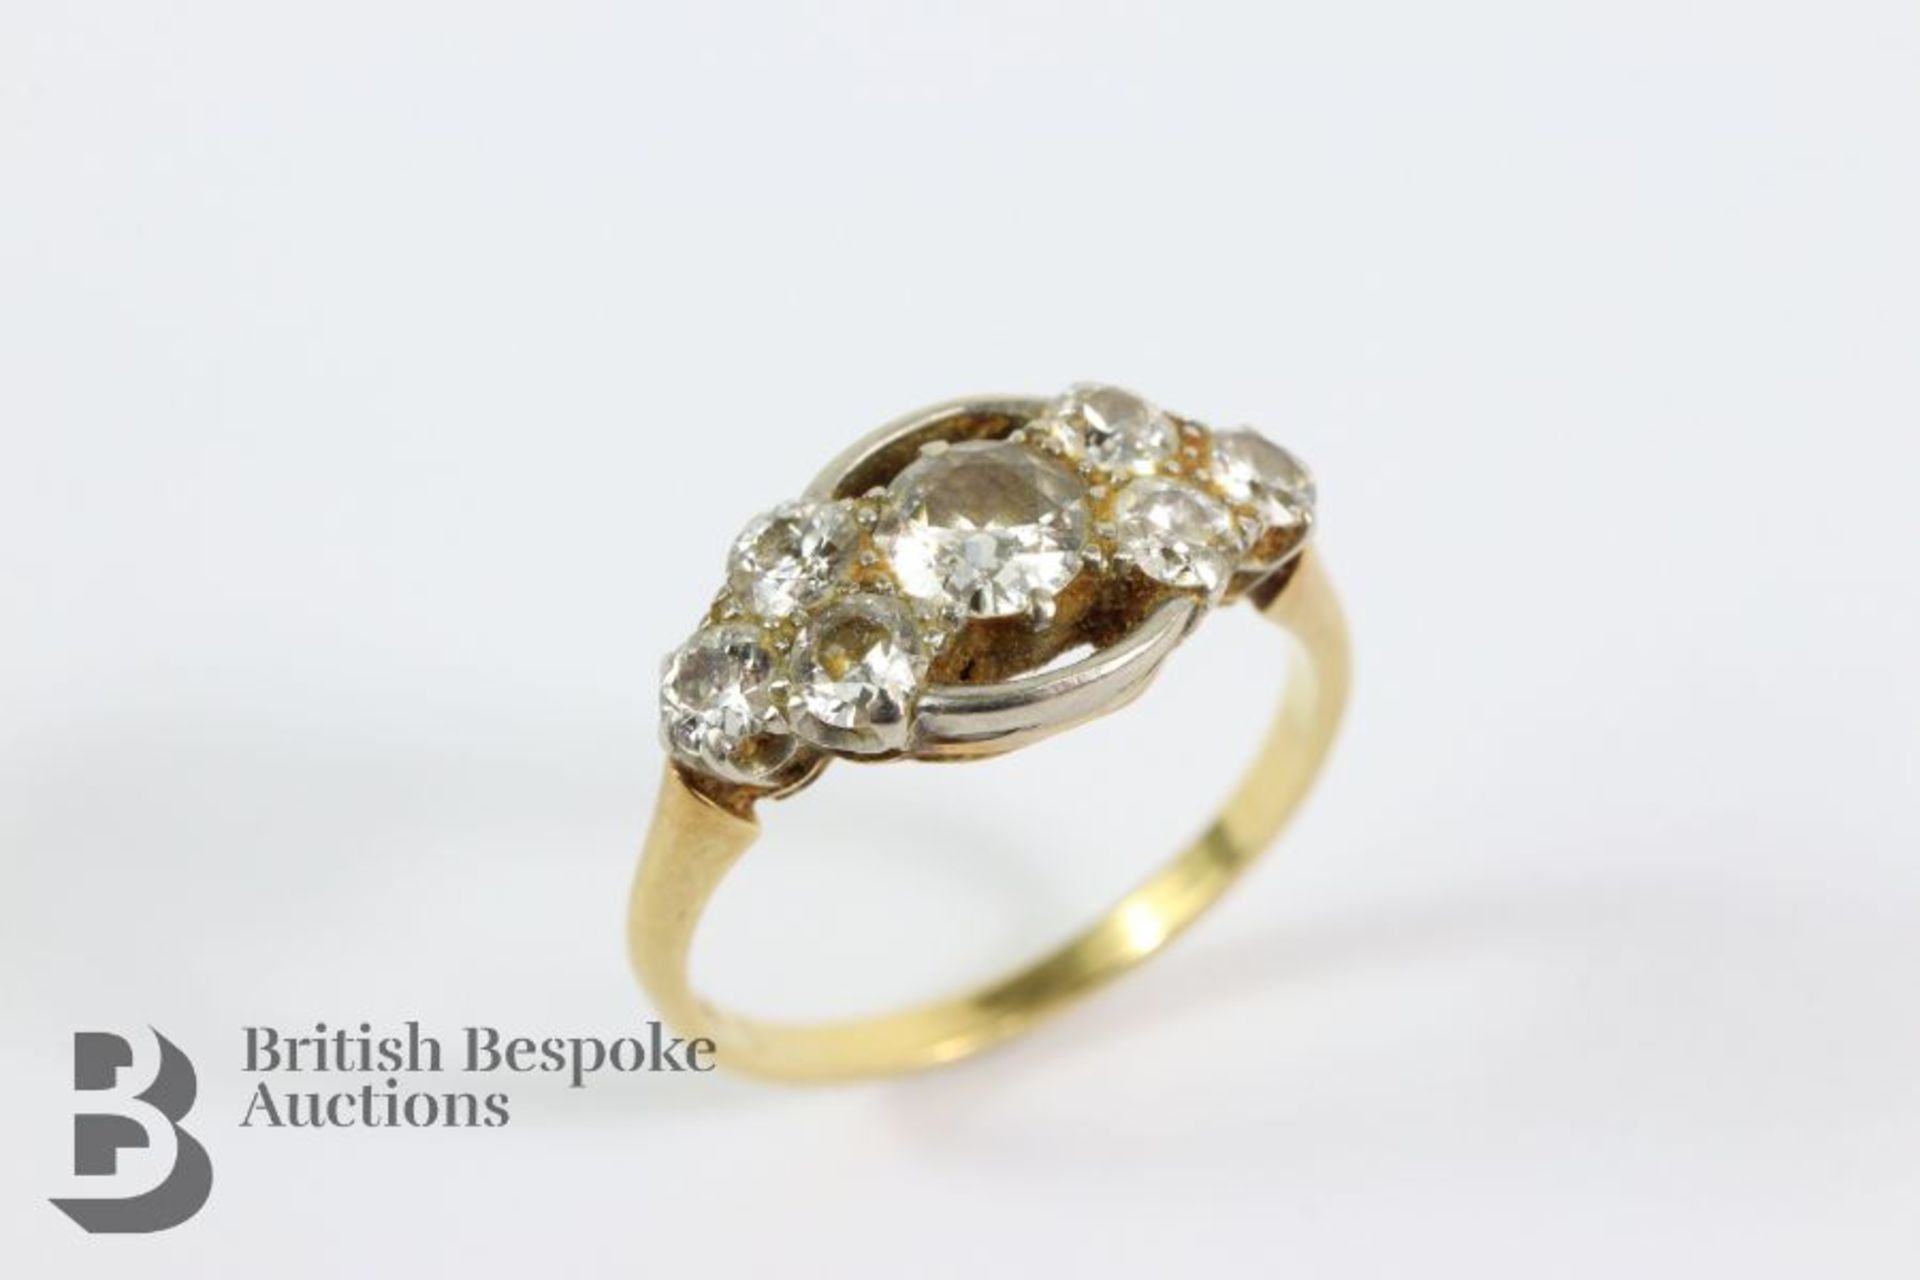 18ct Yellow Gold and Diamond Ring - Image 3 of 3